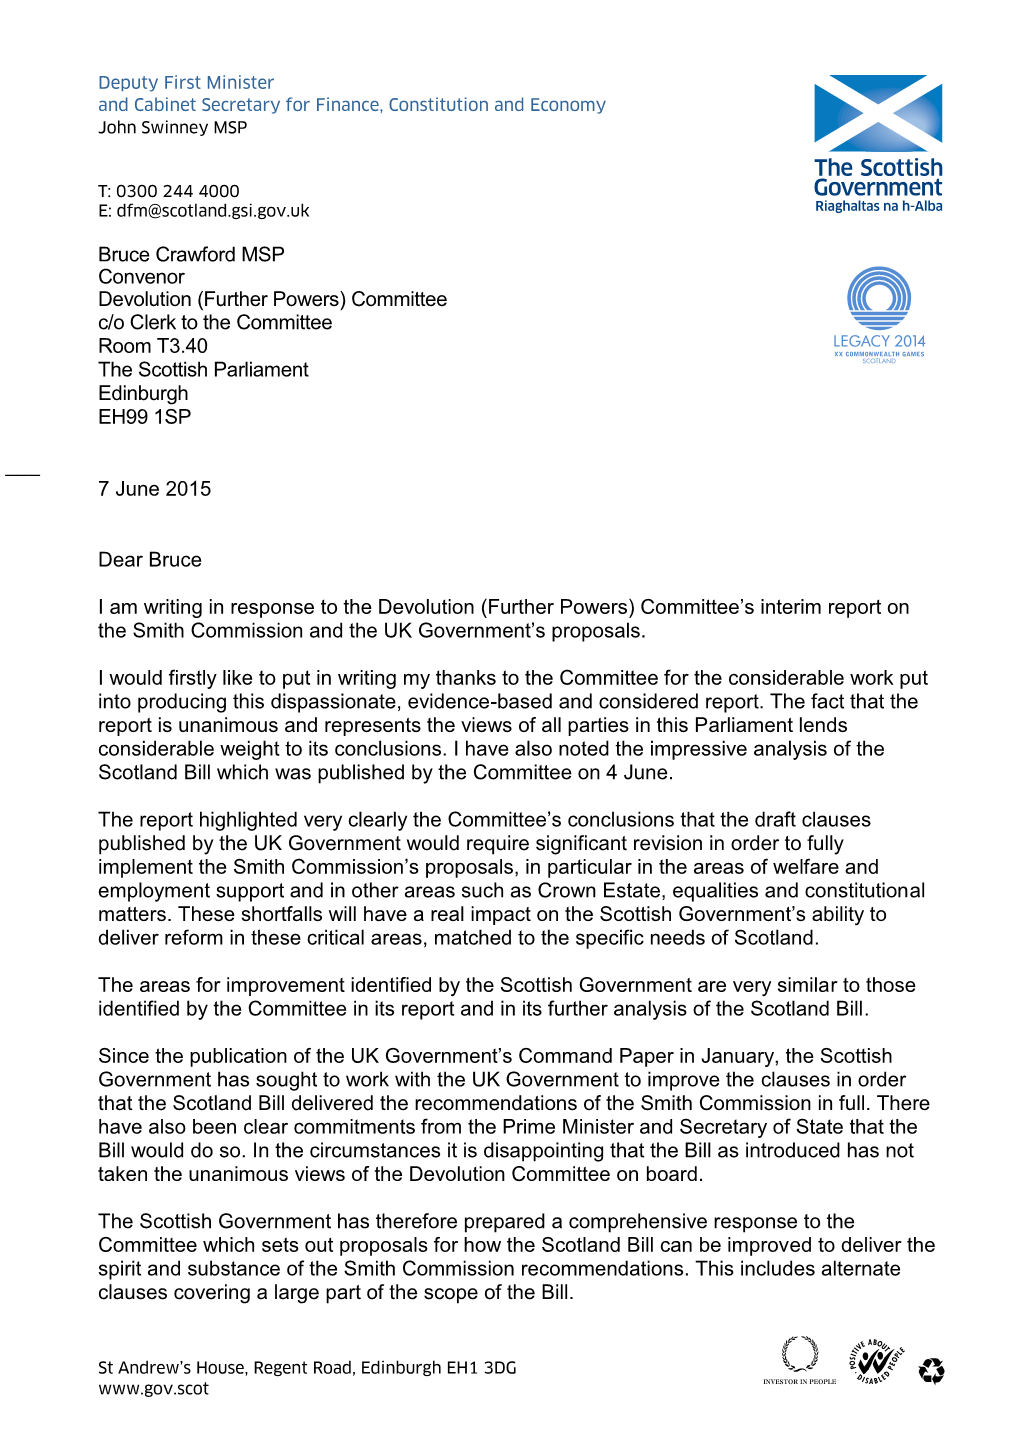 Scottish Government Response to the Interim Report from the Devolution (Further Powers) Committee on the Smith Commission and the Uk Government’S Proposals